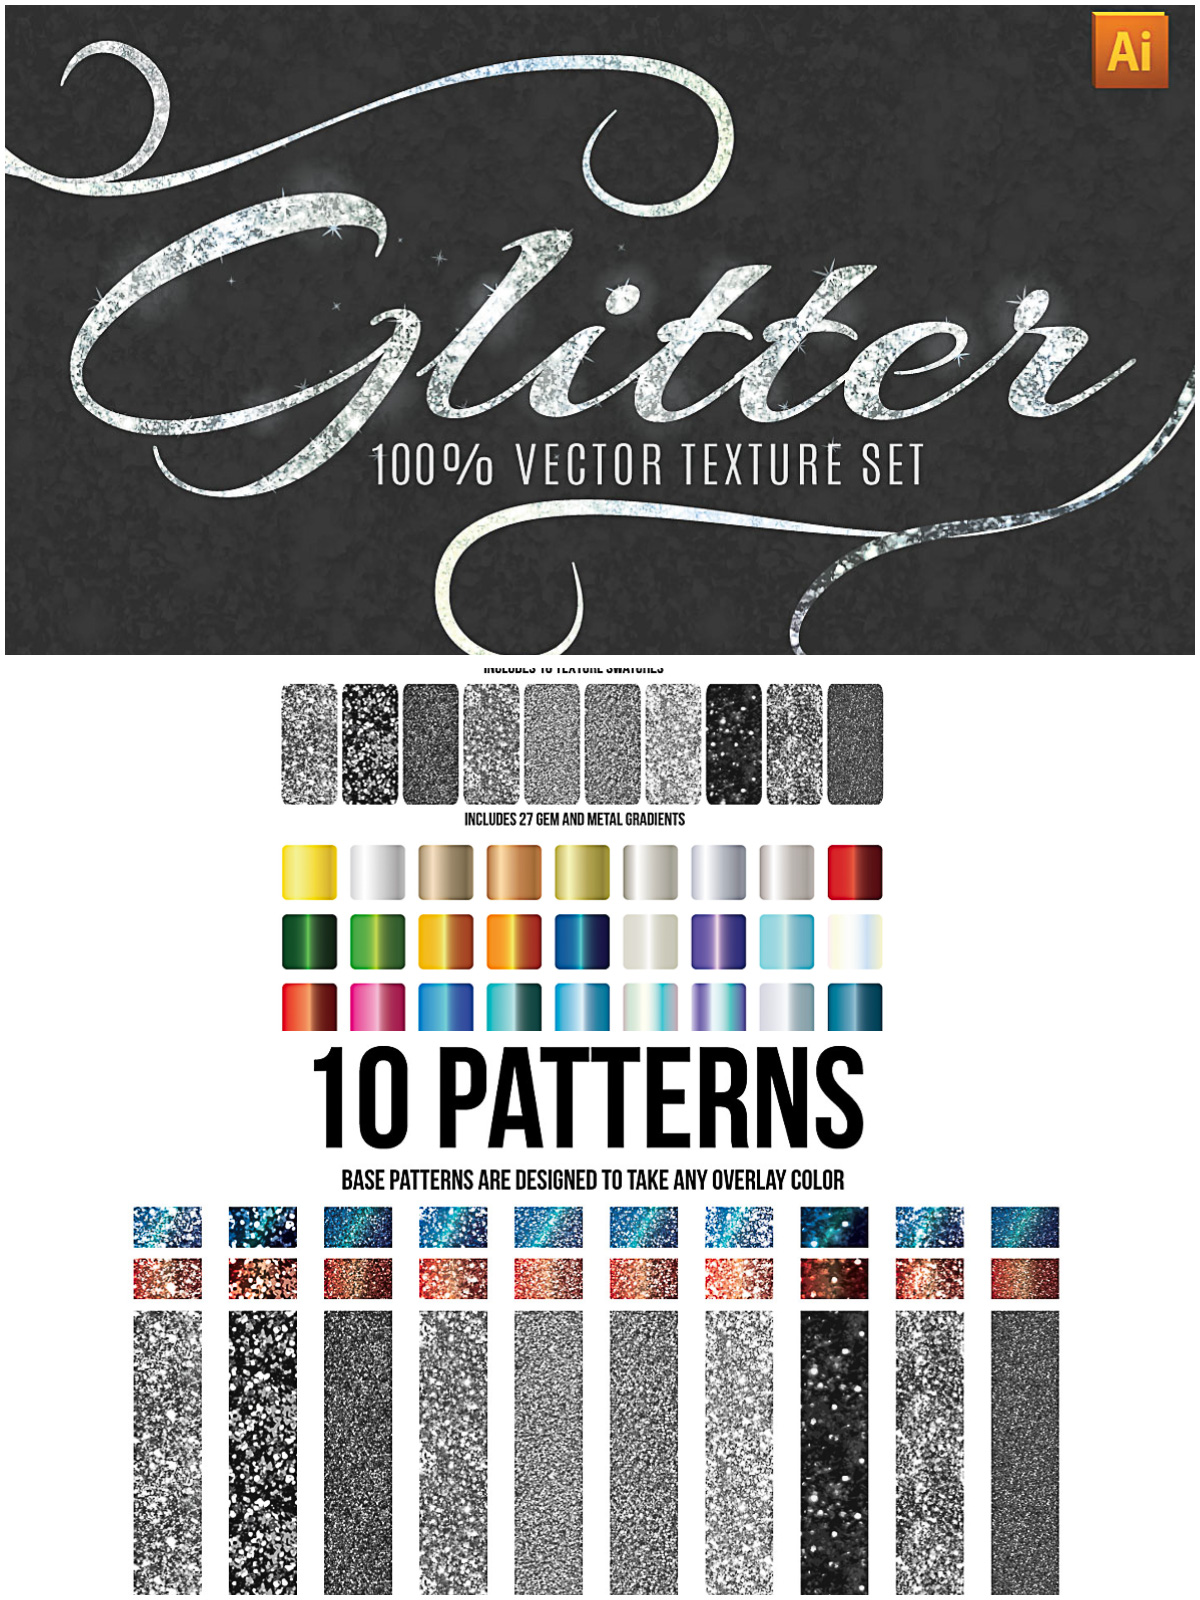 Glitter pattern and texture vector set